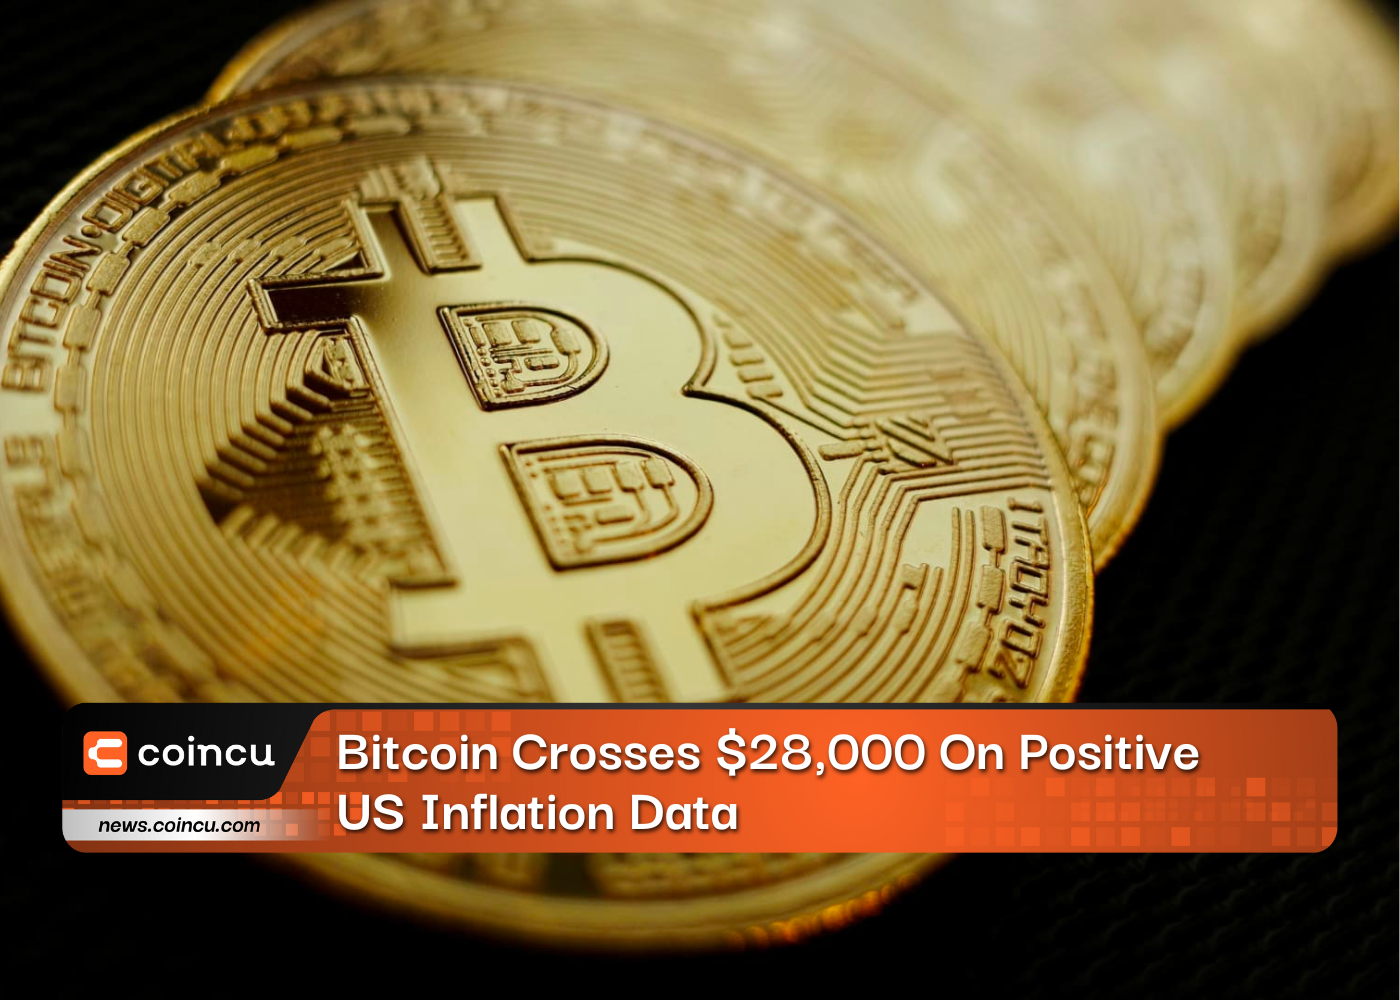 Bitcoin Crosses $28,000 On Positive US Inflation Data